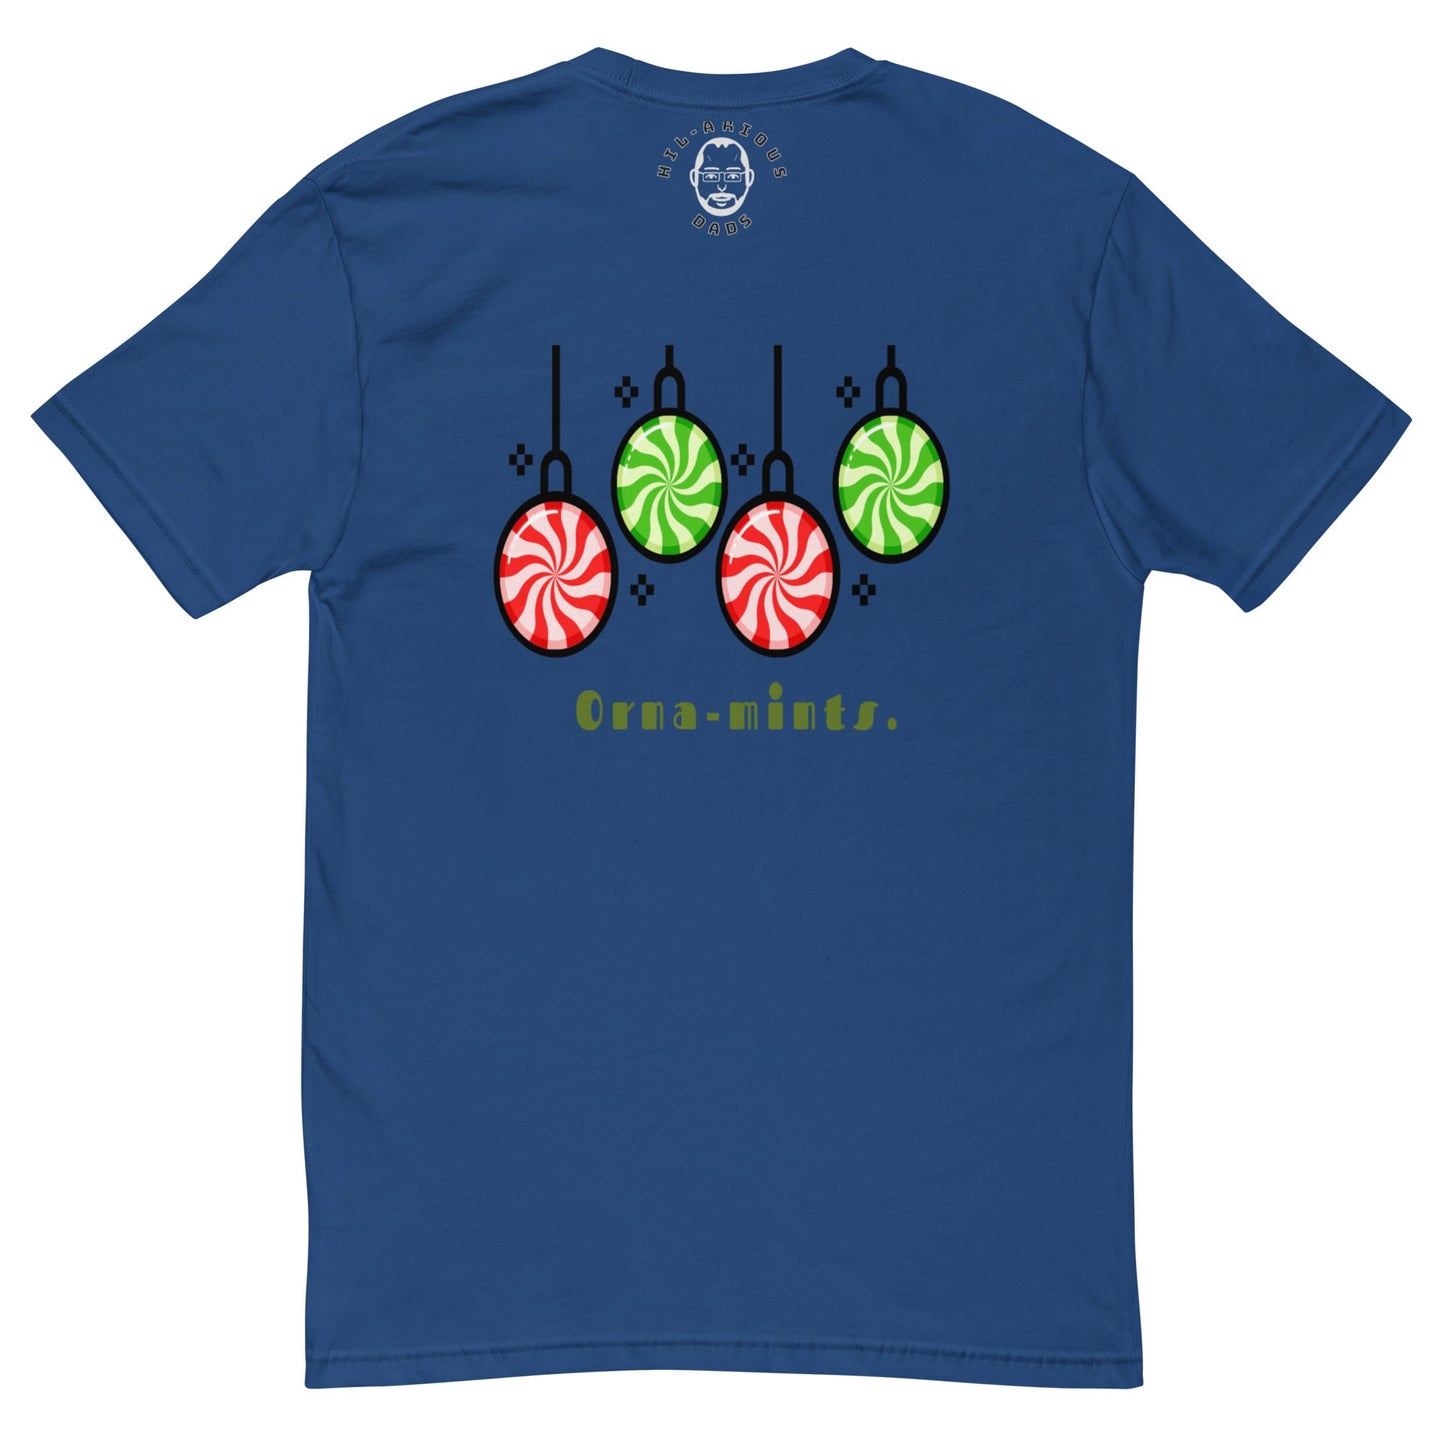 What’s a Christmas tree’s favorite candy?-T-shirt - Hil-arious Dads